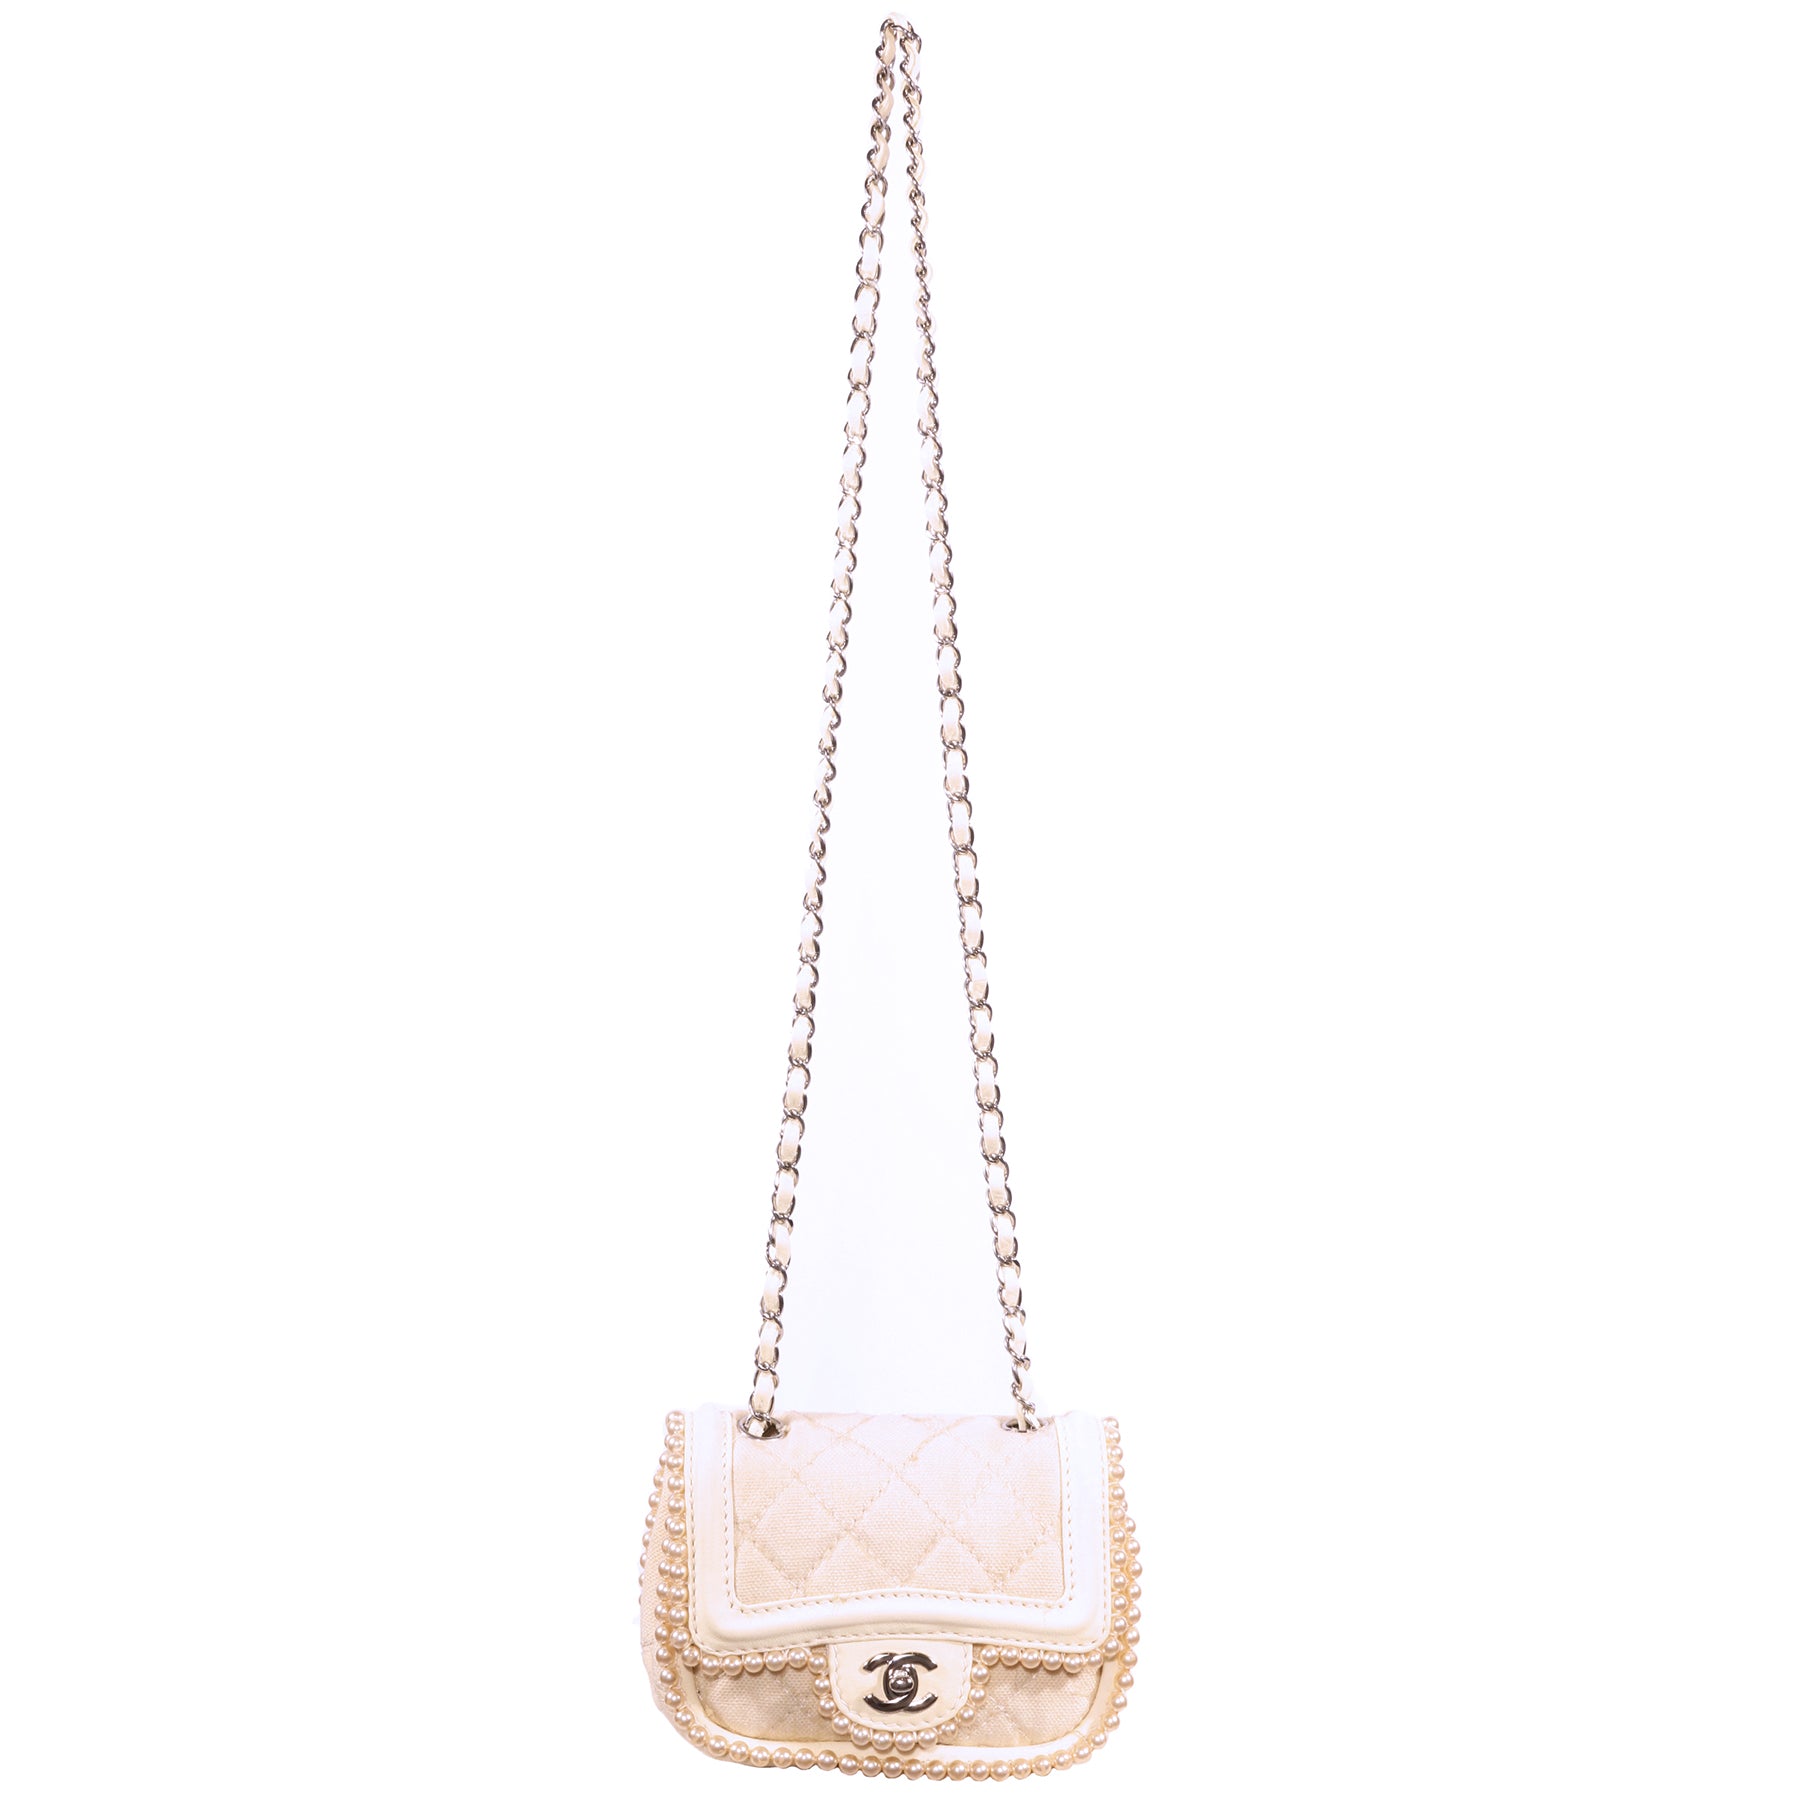 Chanel Vintage Small Quilted Crossbody Bag, $3,587